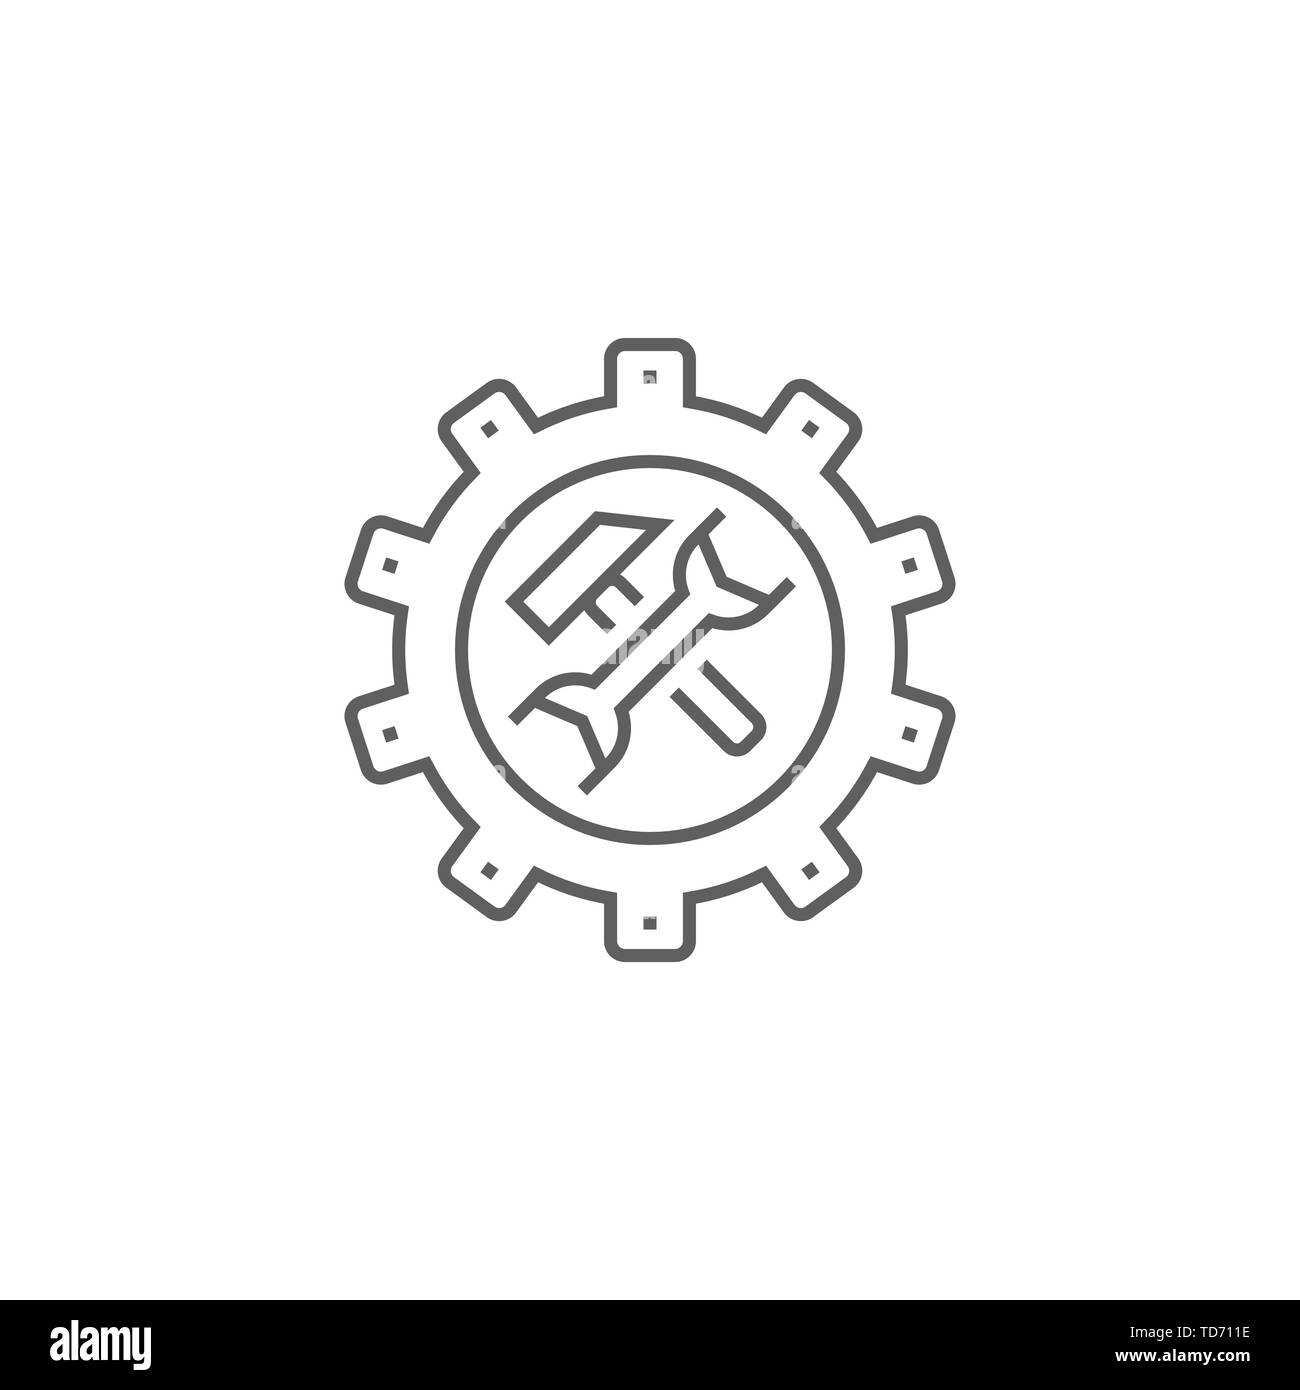 Technical Support Related Vector Thin Line Icon. Isolated on White Background. Editable Stroke. Vector Illustration. Stock Vector